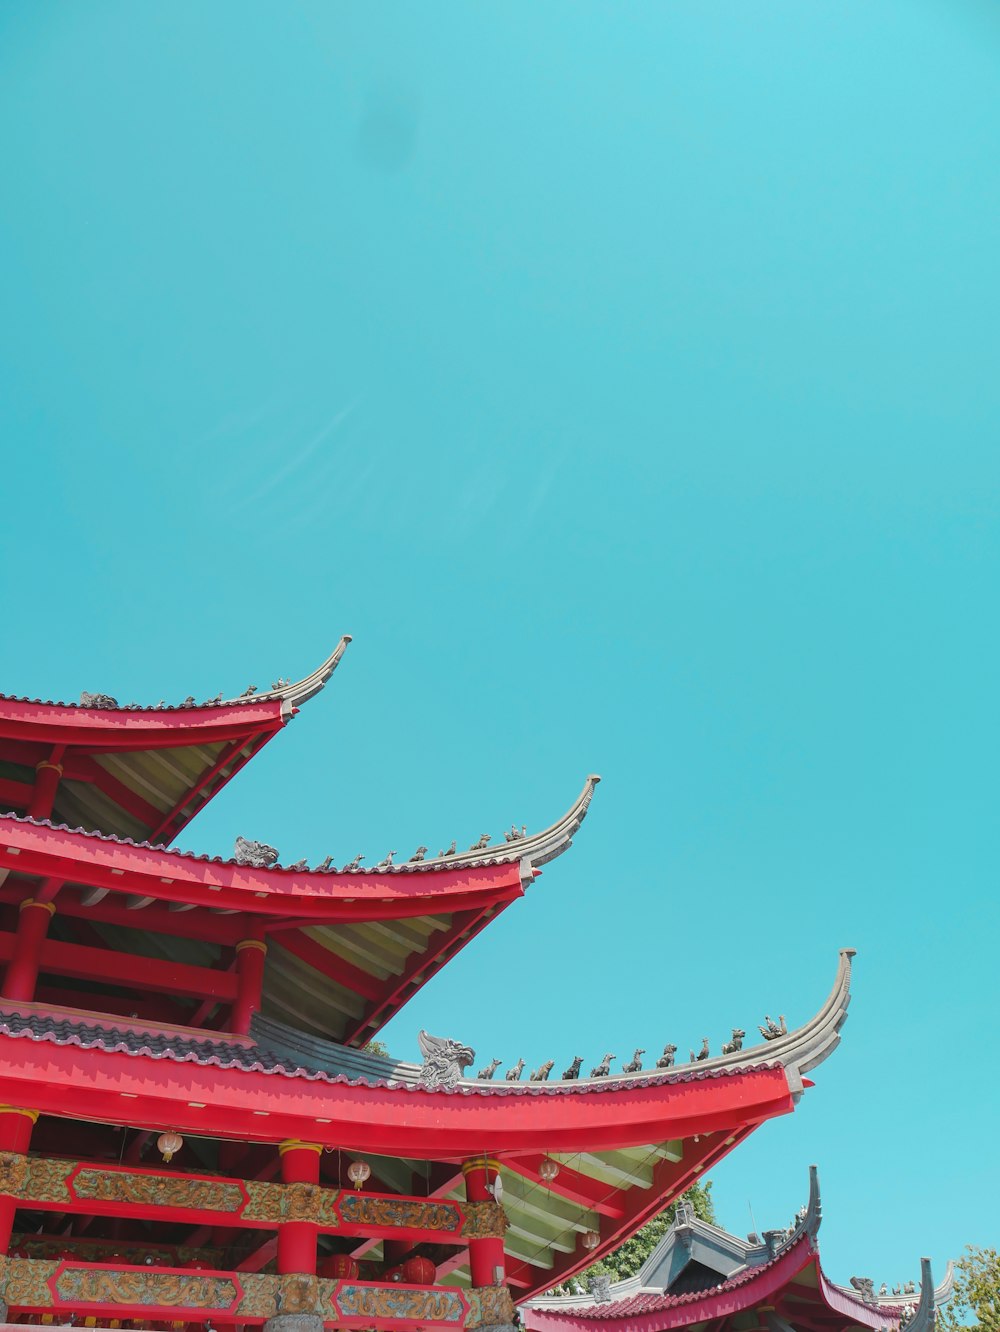 low-angle photography of red and green pagoda building under a calm blue sky